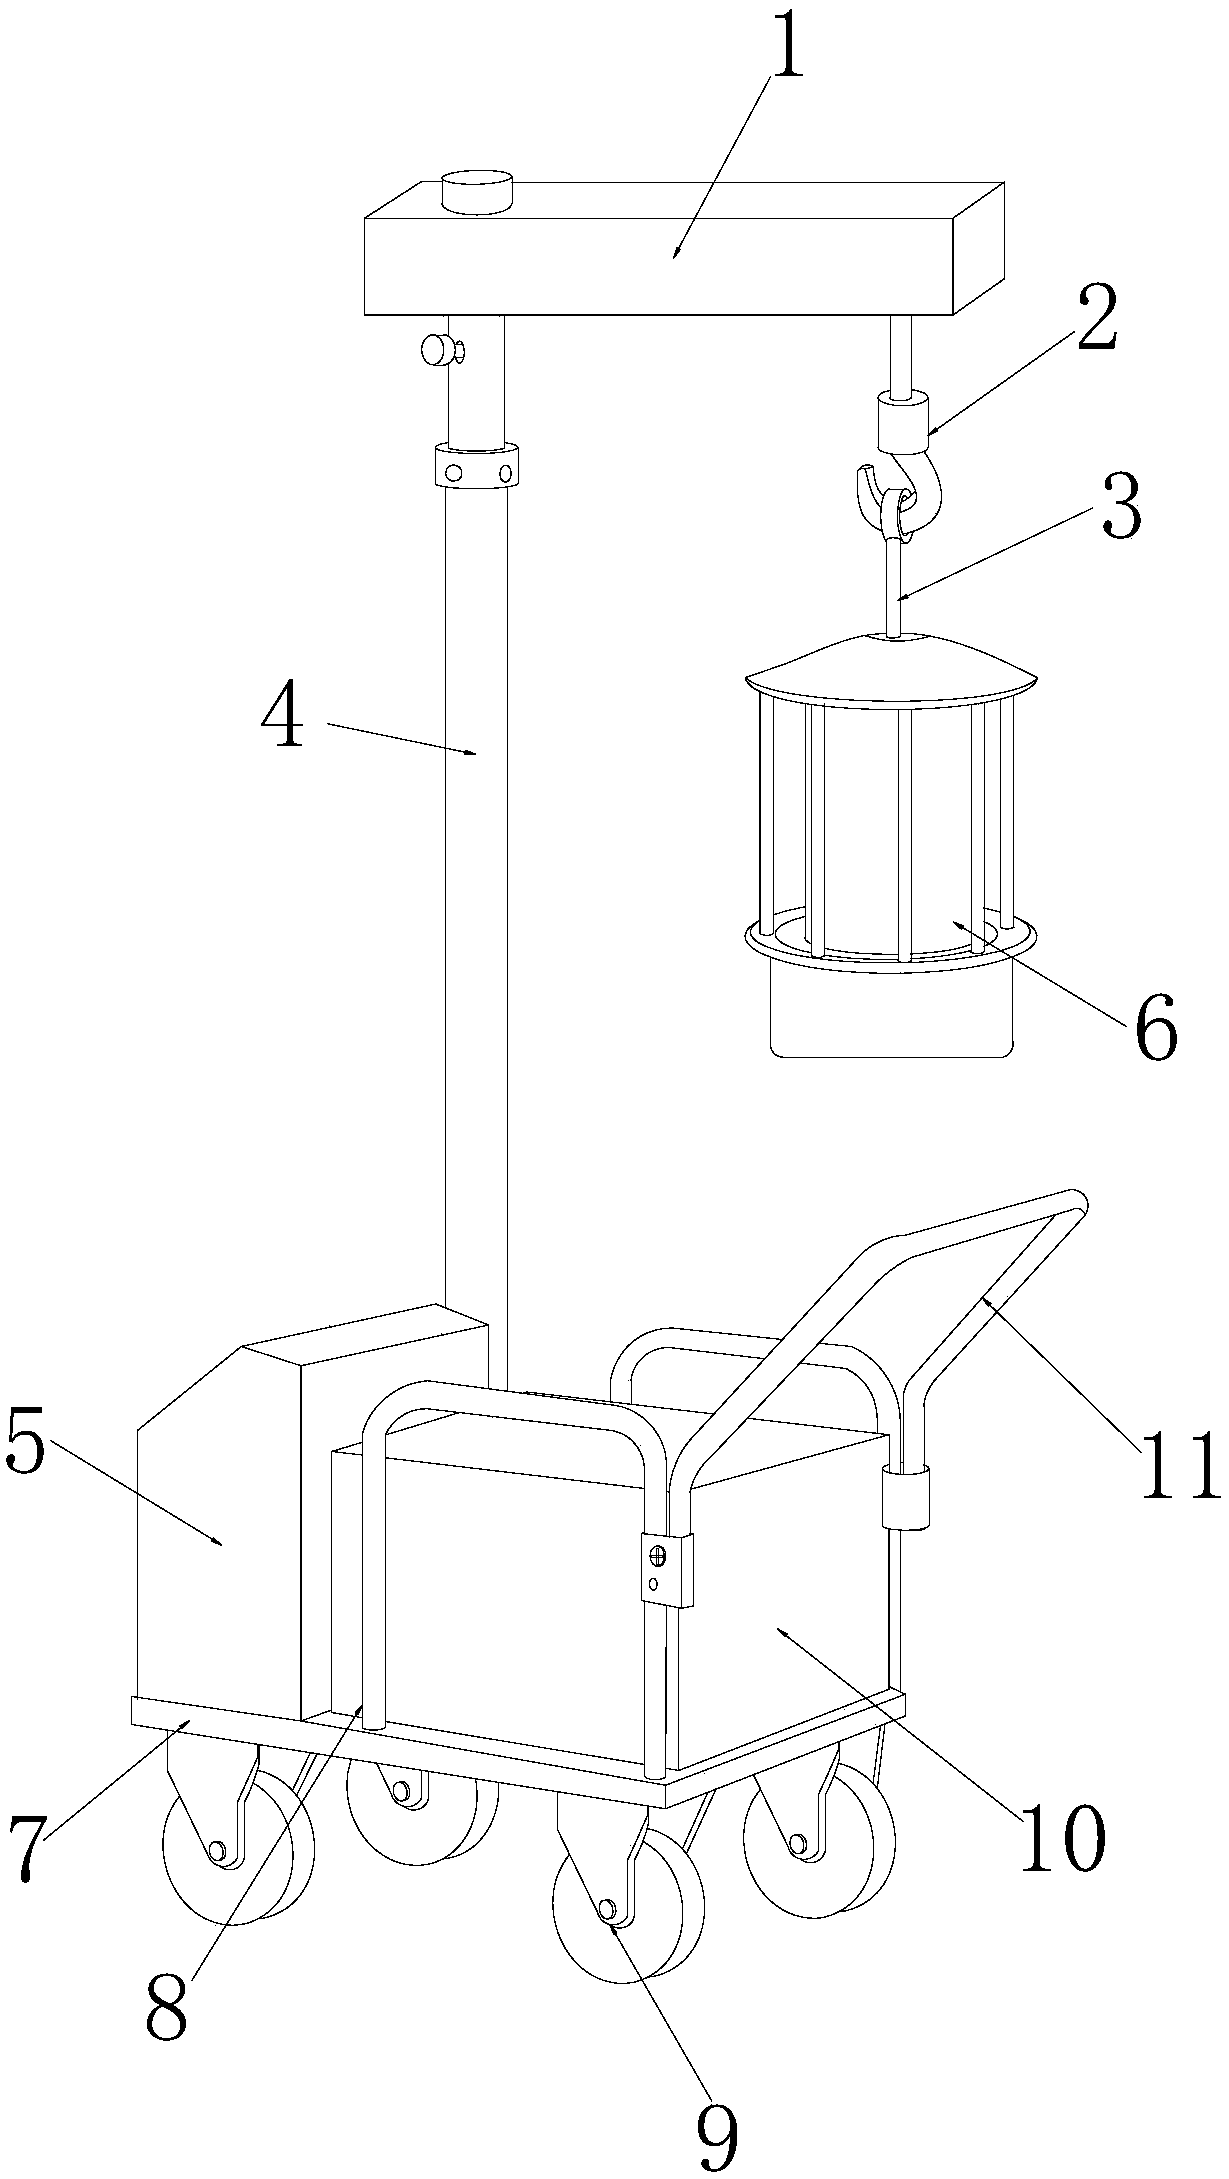 Lighting device for electric power maintenance